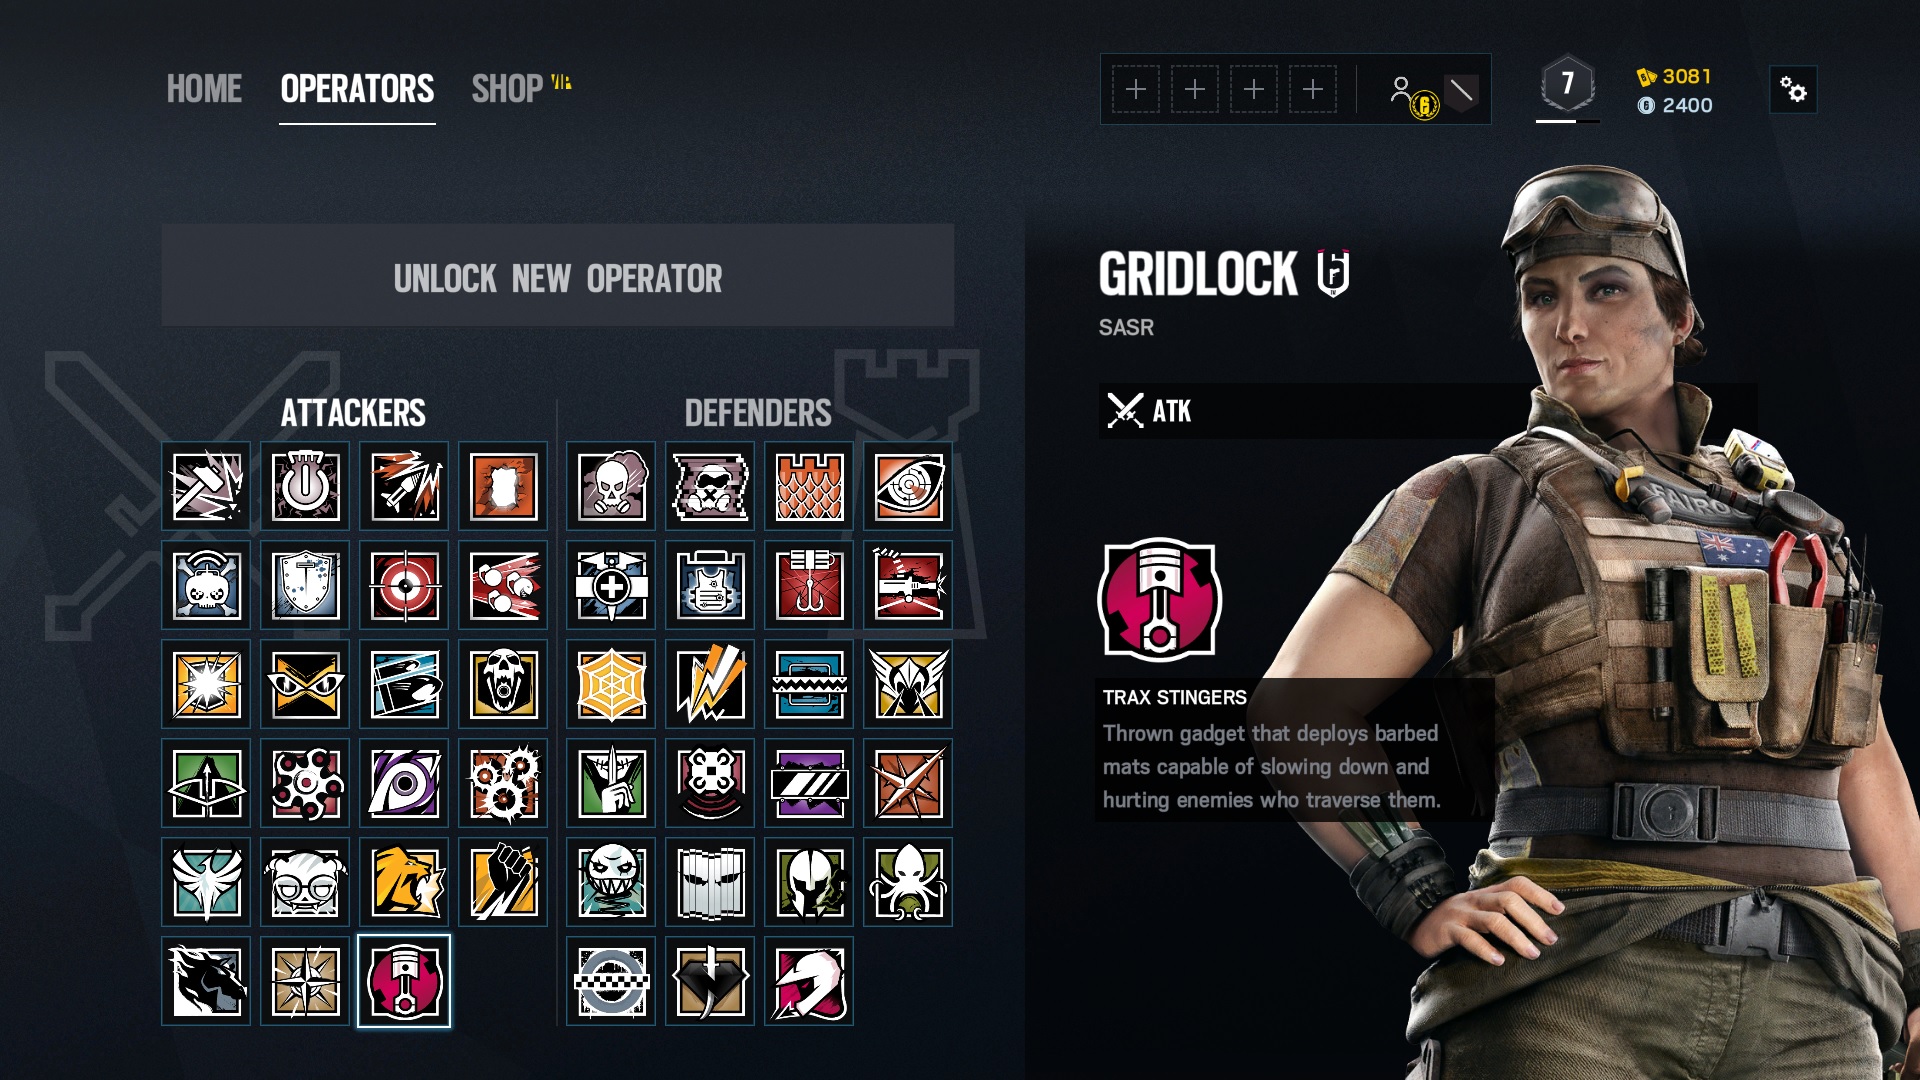 gridlock r6 based off of